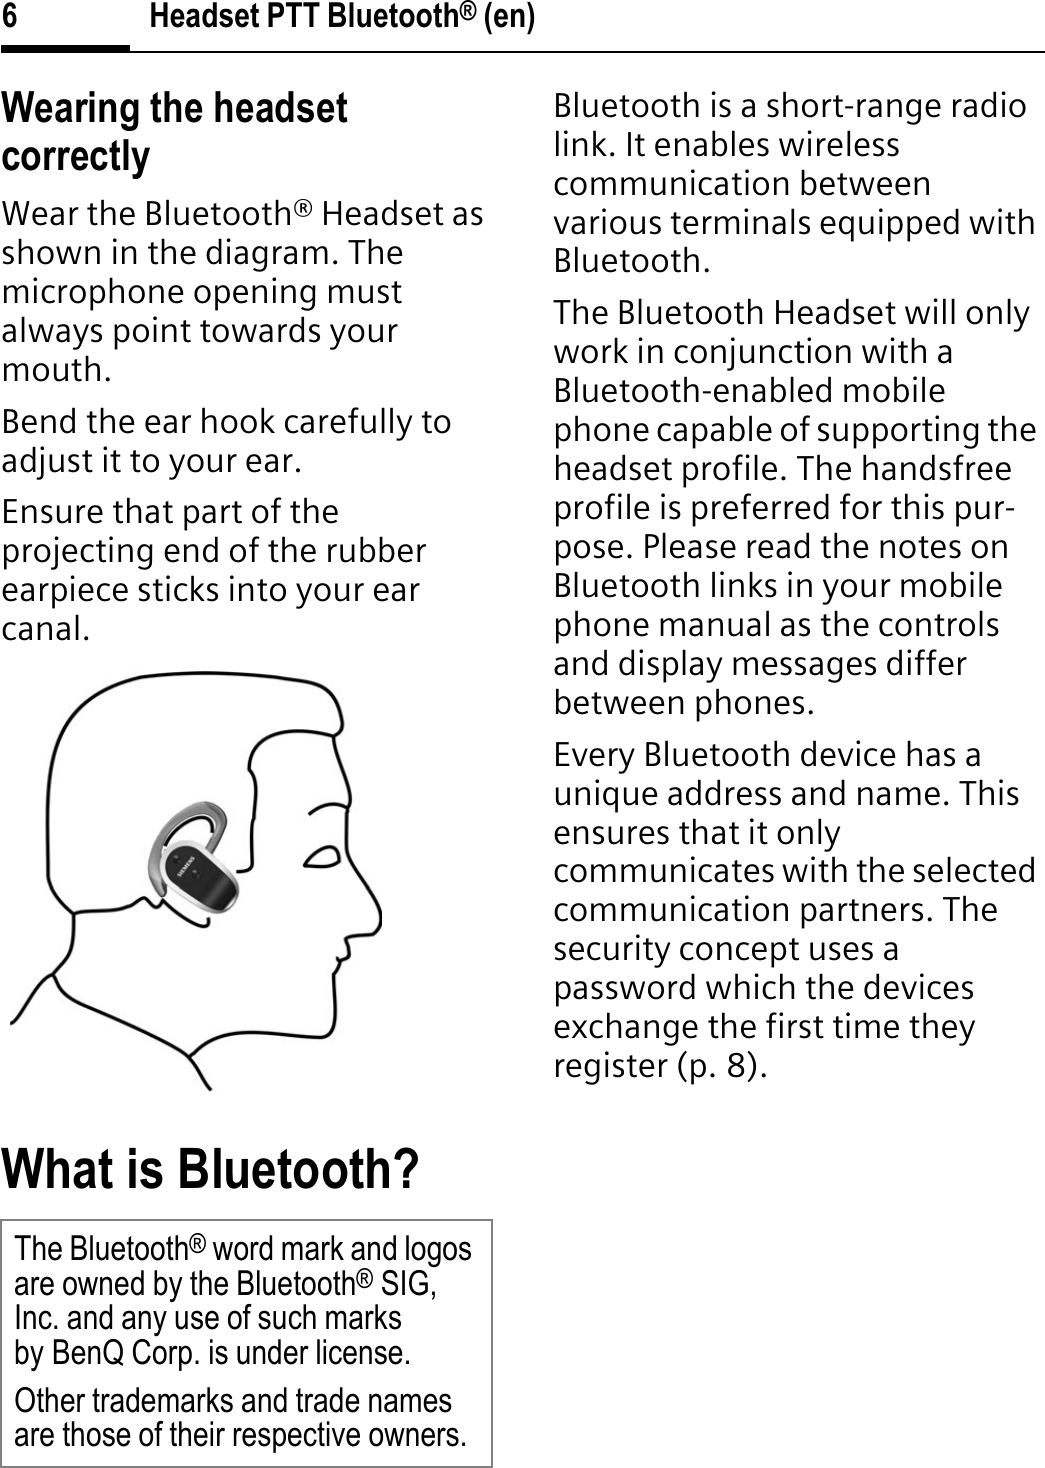 Headset PTT Bluetooth® (en)6Wearing the headset correctlyWear the Bluetooth® Headset as shown in the diagram. The microphone opening must always point towards your mouth.Bend the ear hook carefully to adjust it to your ear.Ensure that part of the projecting end of the rubber earpiece sticks into your ear canal.What is Bluetooth?Bluetooth is a short-range radio link. It enables wireless communication between various terminals equipped with Bluetooth.The Bluetooth Headset will only work in conjunction with a Bluetooth-enabled mobile phone capable of supporting the headset profile. The handsfree profile is preferred for this pur-pose. Please read the notes on Bluetooth links in your mobile phone manual as the controls and display messages differ between phones.Every Bluetooth device has a unique address and name. This ensures that it only communicates with the selected communication partners. The security concept uses a password which the devices exchange the first time they register (p. 8).The Bluetooth® word mark and logos are owned by the Bluetooth®SIG, Inc. and any use of such marks by BenQ Corp. is under license.Other trademarks and trade names are those of their respective owners.